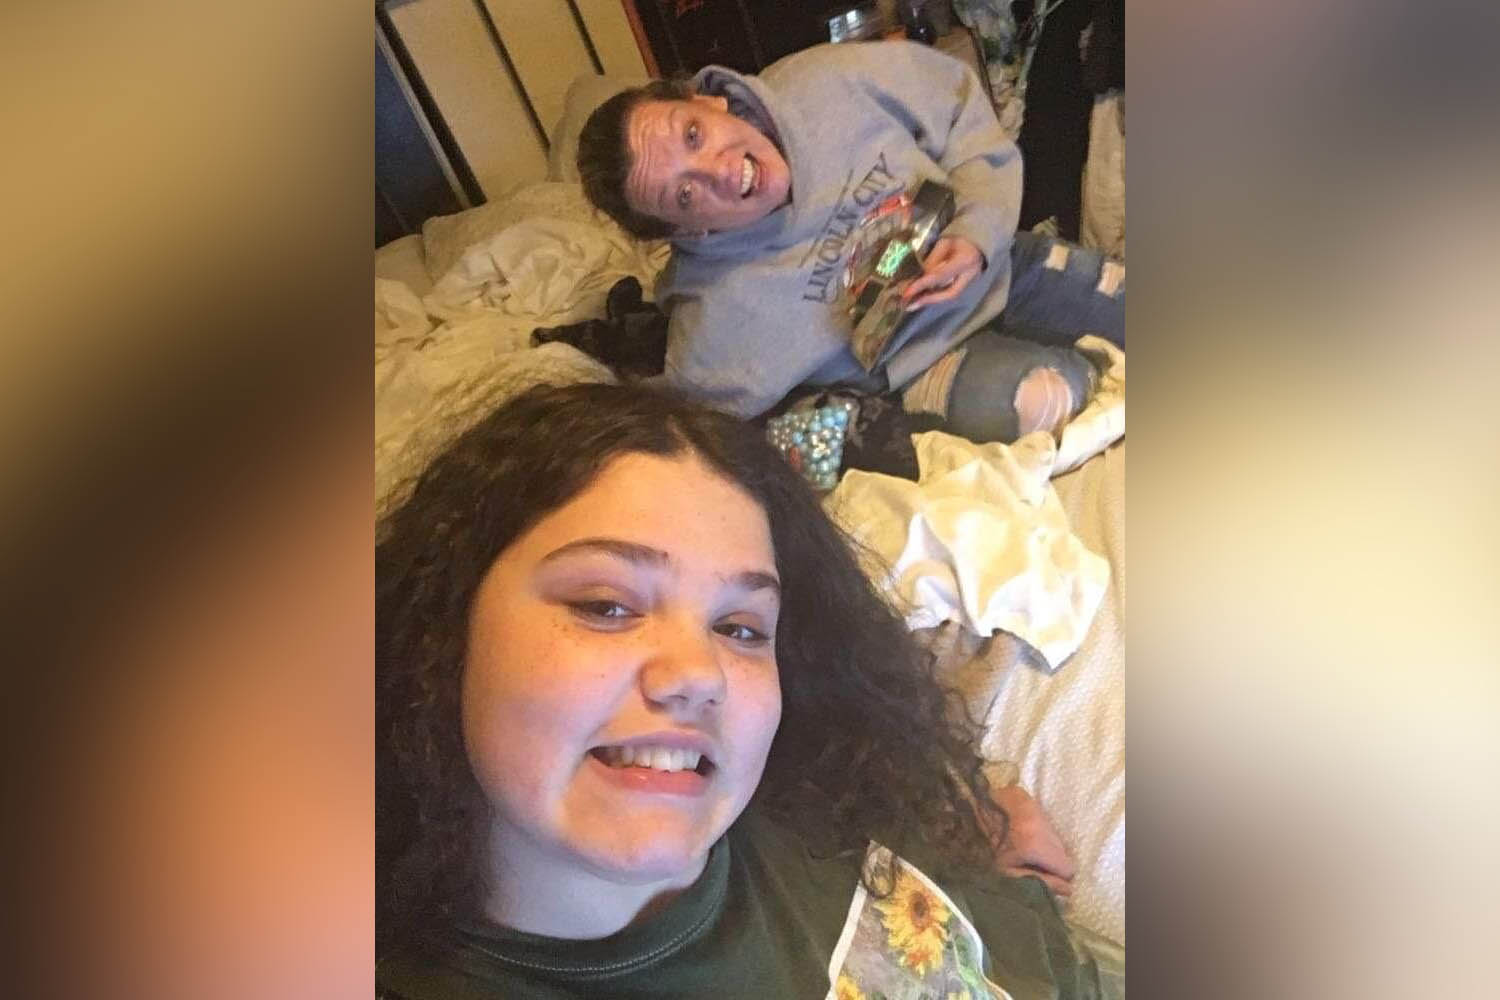 13-year-old girl severely burned while imitating TikTok video, family says  pic